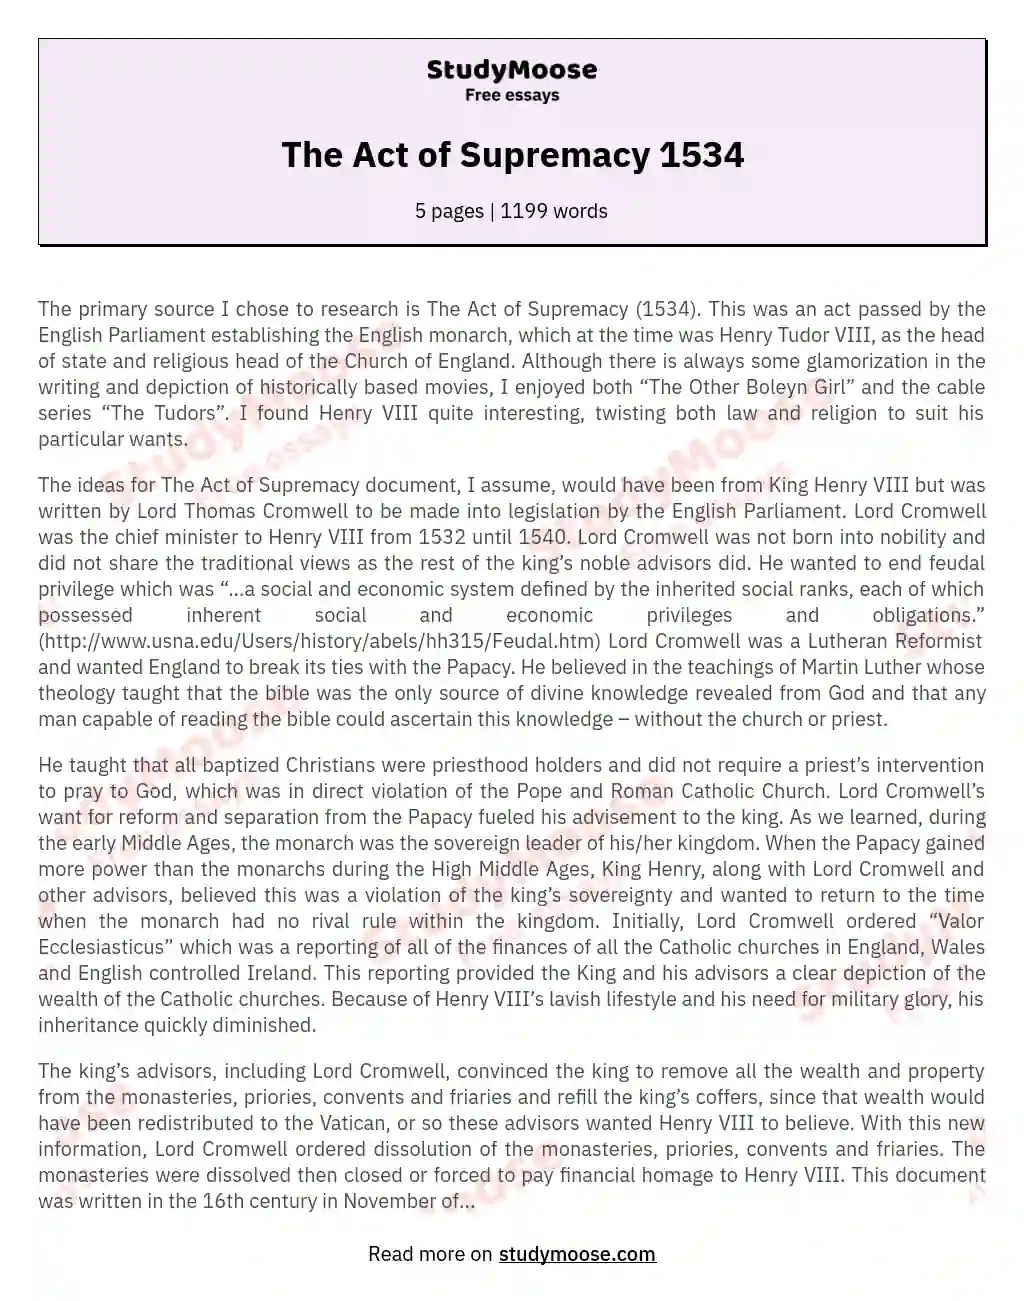 The Act of Supremacy 1534 essay